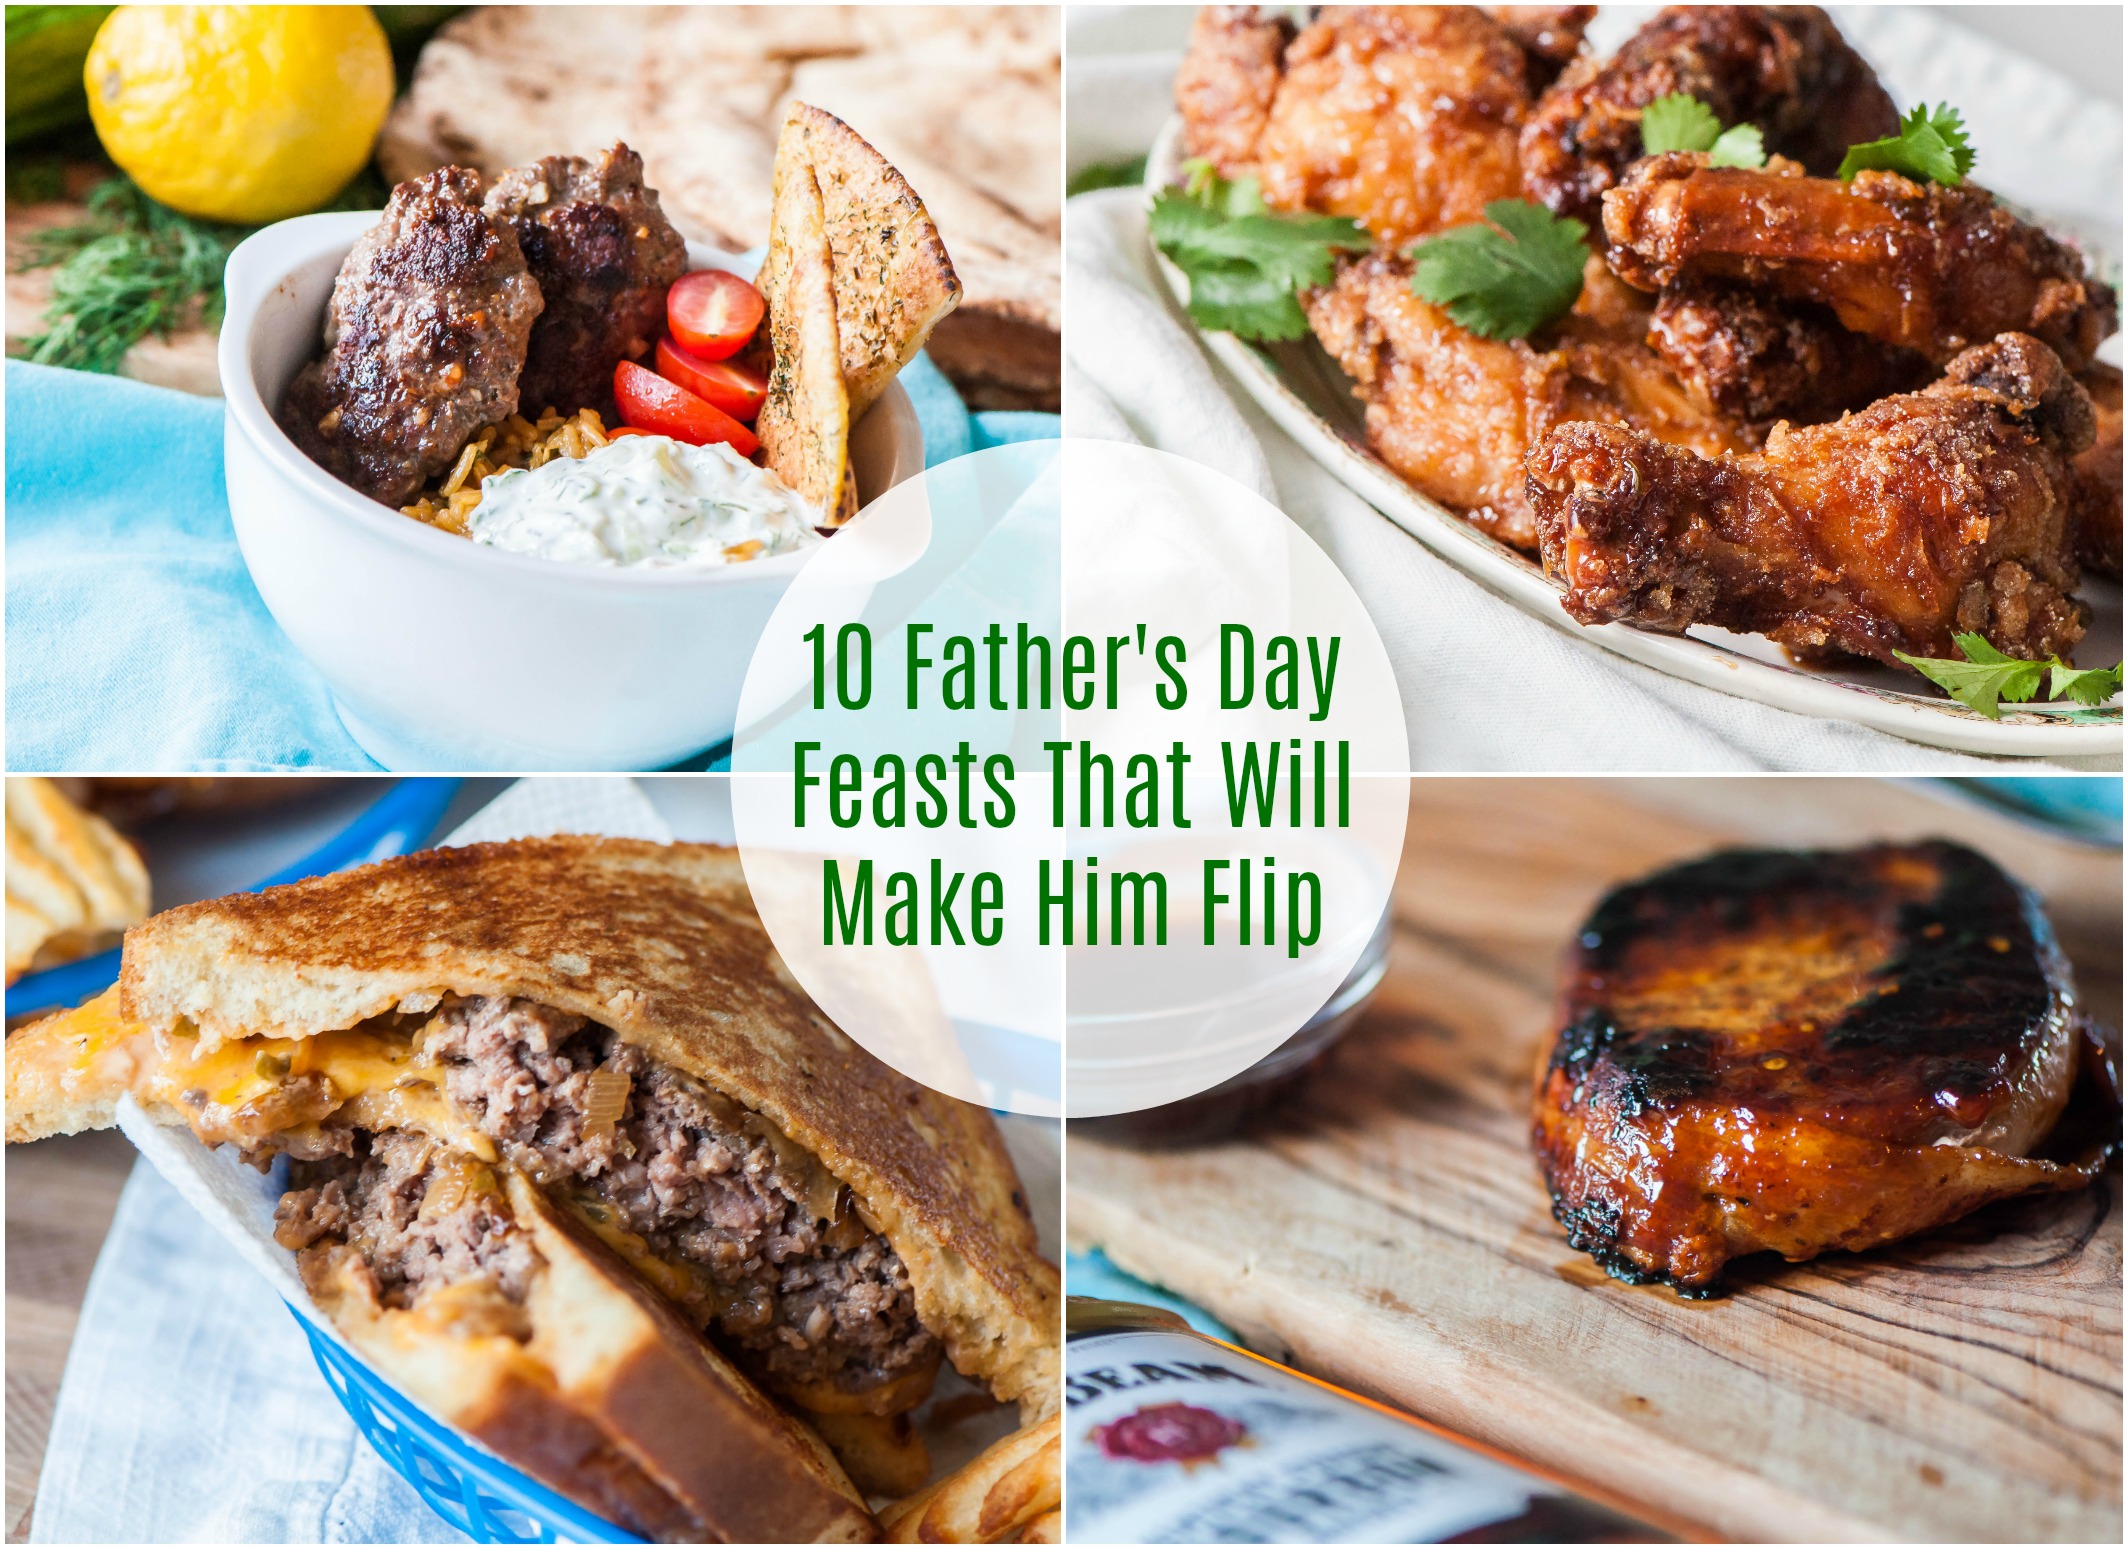 10 father’s day feasts that will make him flip